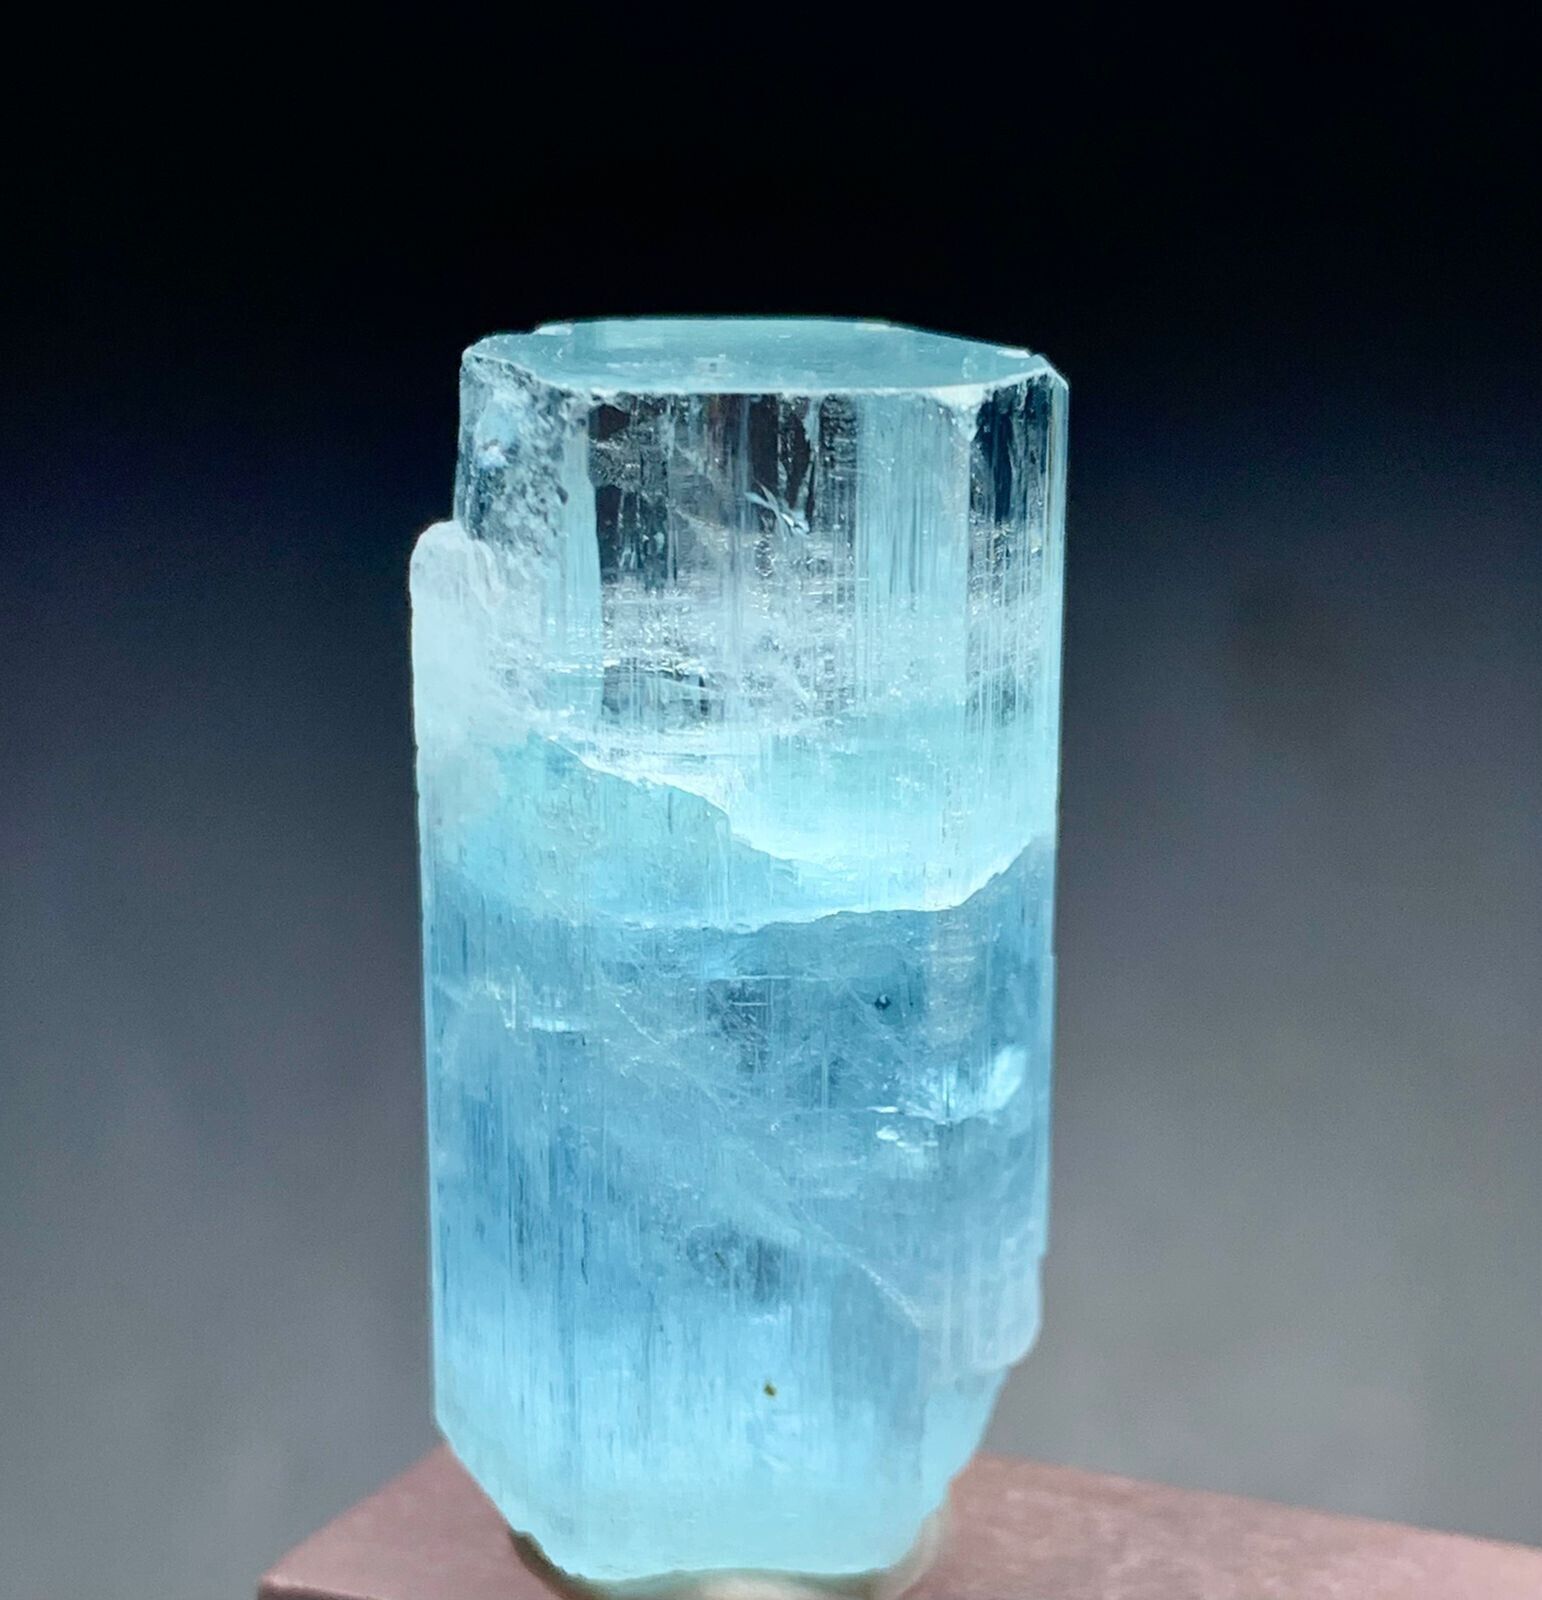 100 Cts Top Quality Terminated Aquamarine Crystal from Skardu Pakistan